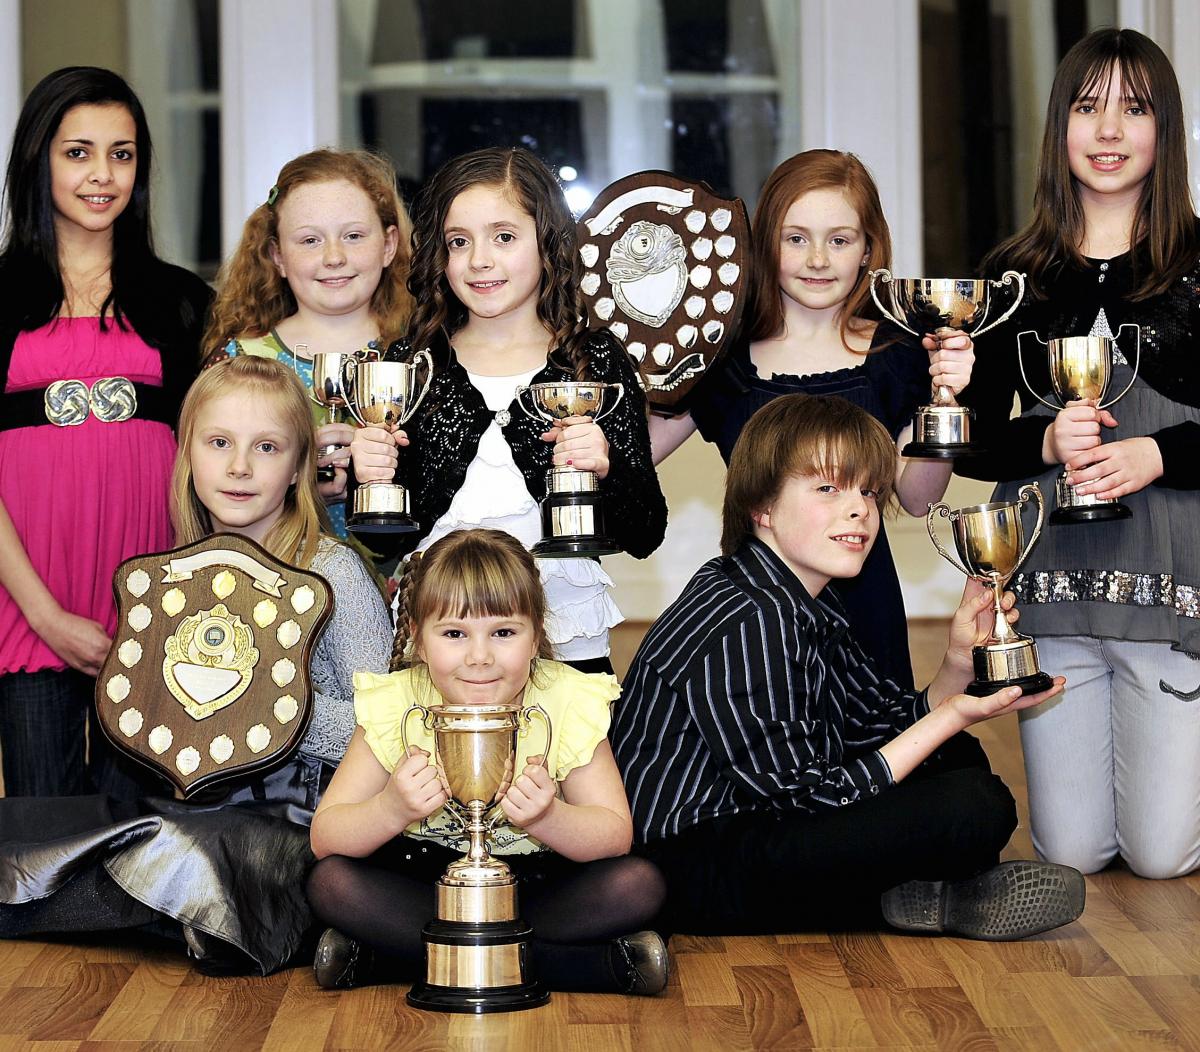 These youngsters at Bradford's Stage 84 have won armfuls of trophies from a performing arts festival. 